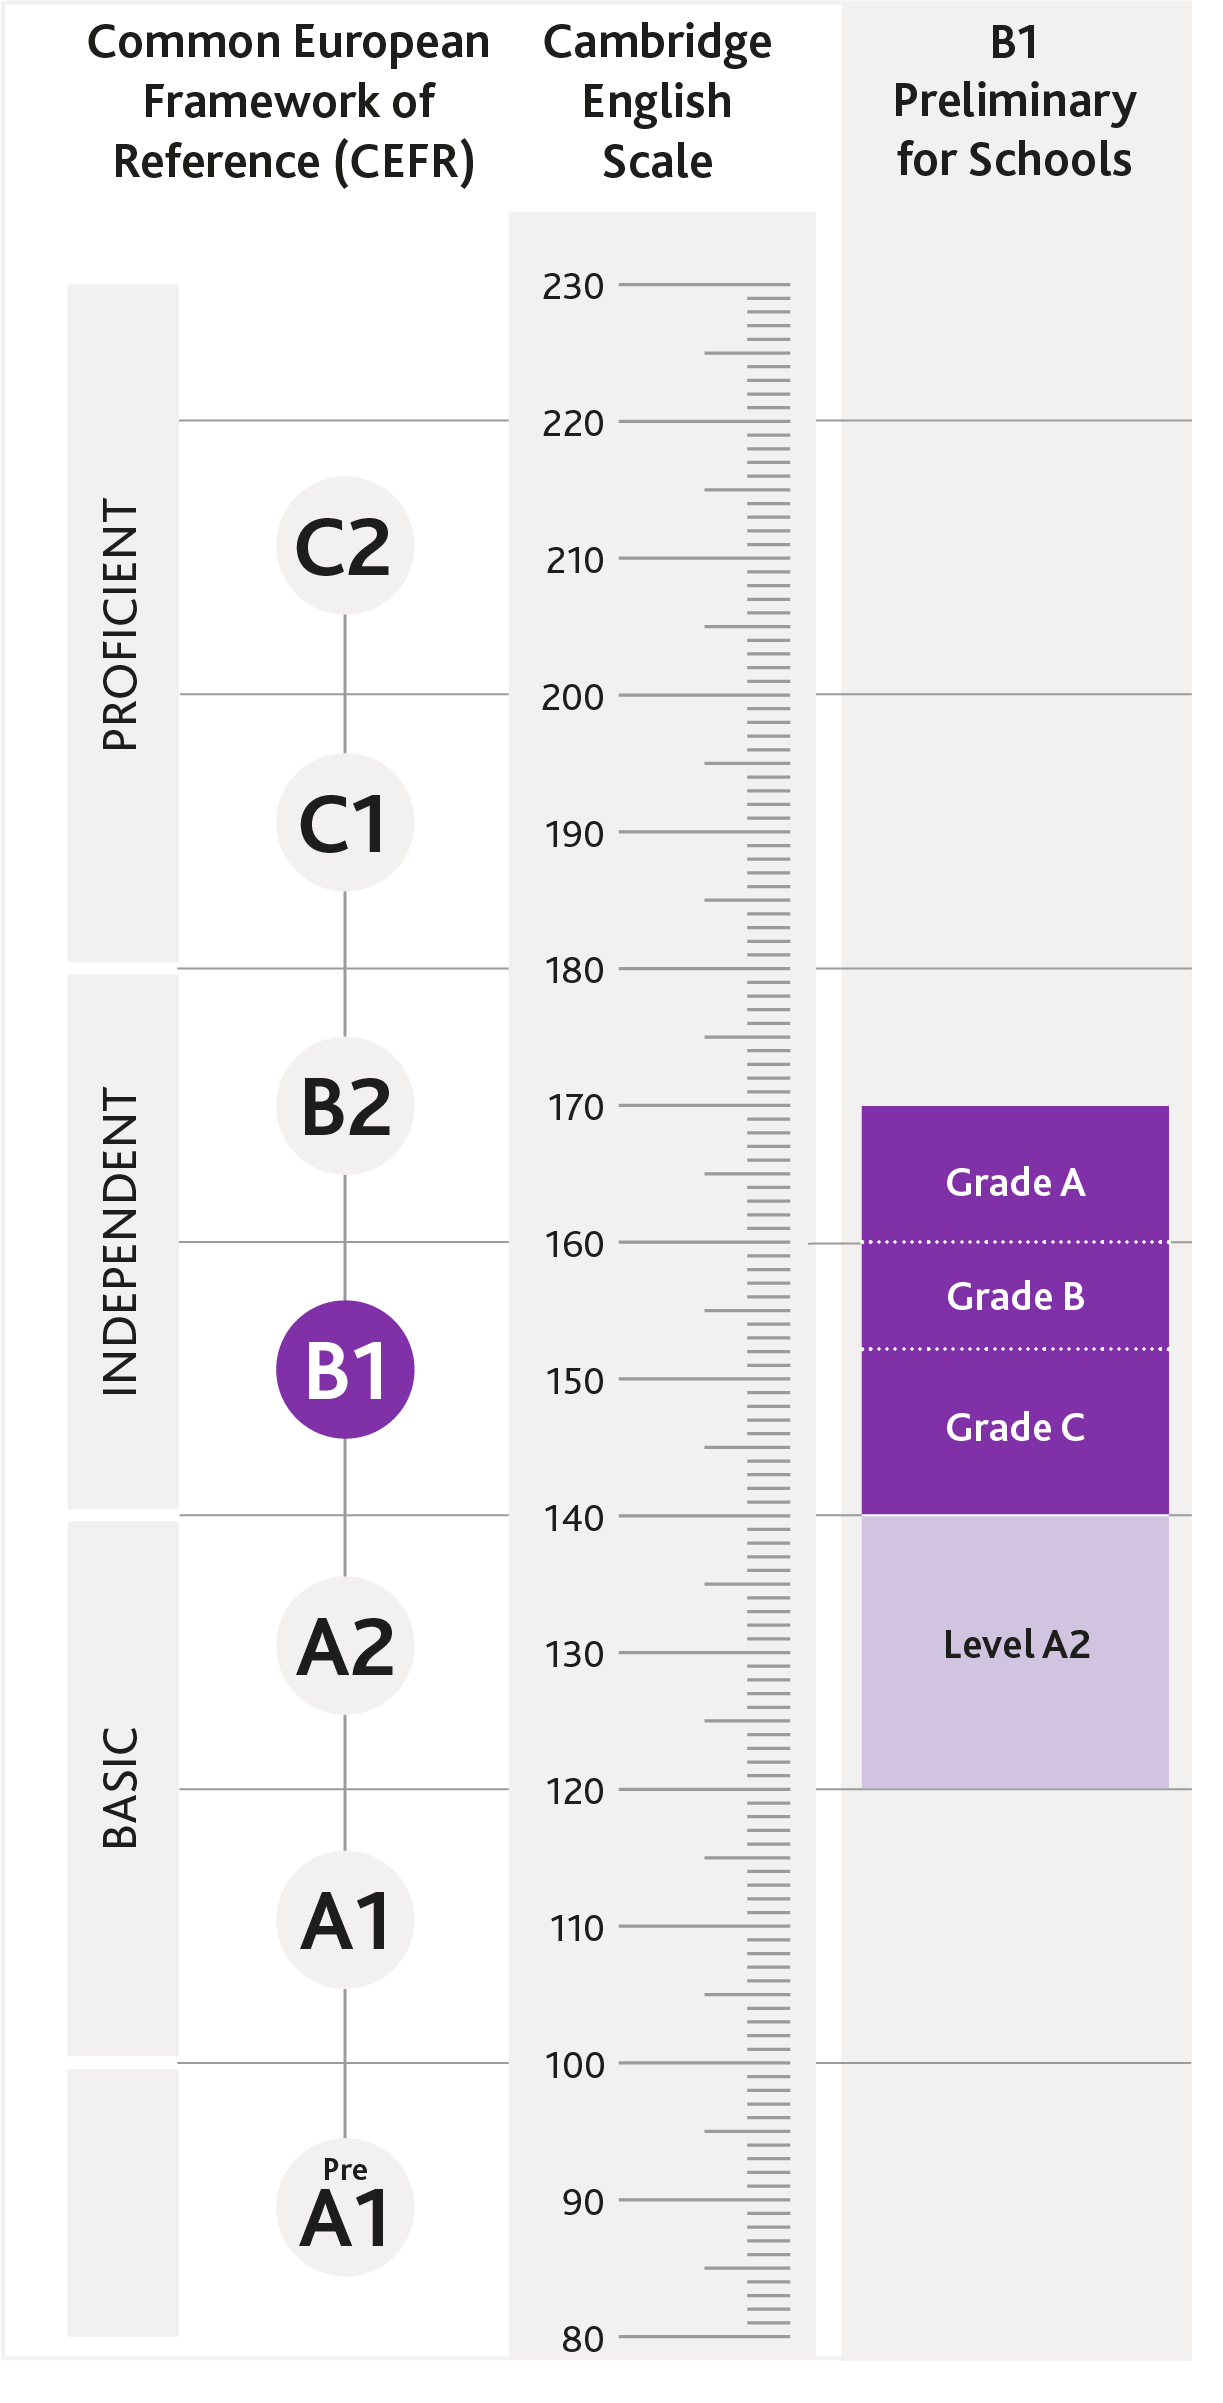 Diagram of where B1 Preliminary for Schools is aligned on the CEFR and the Cambridge English Scale